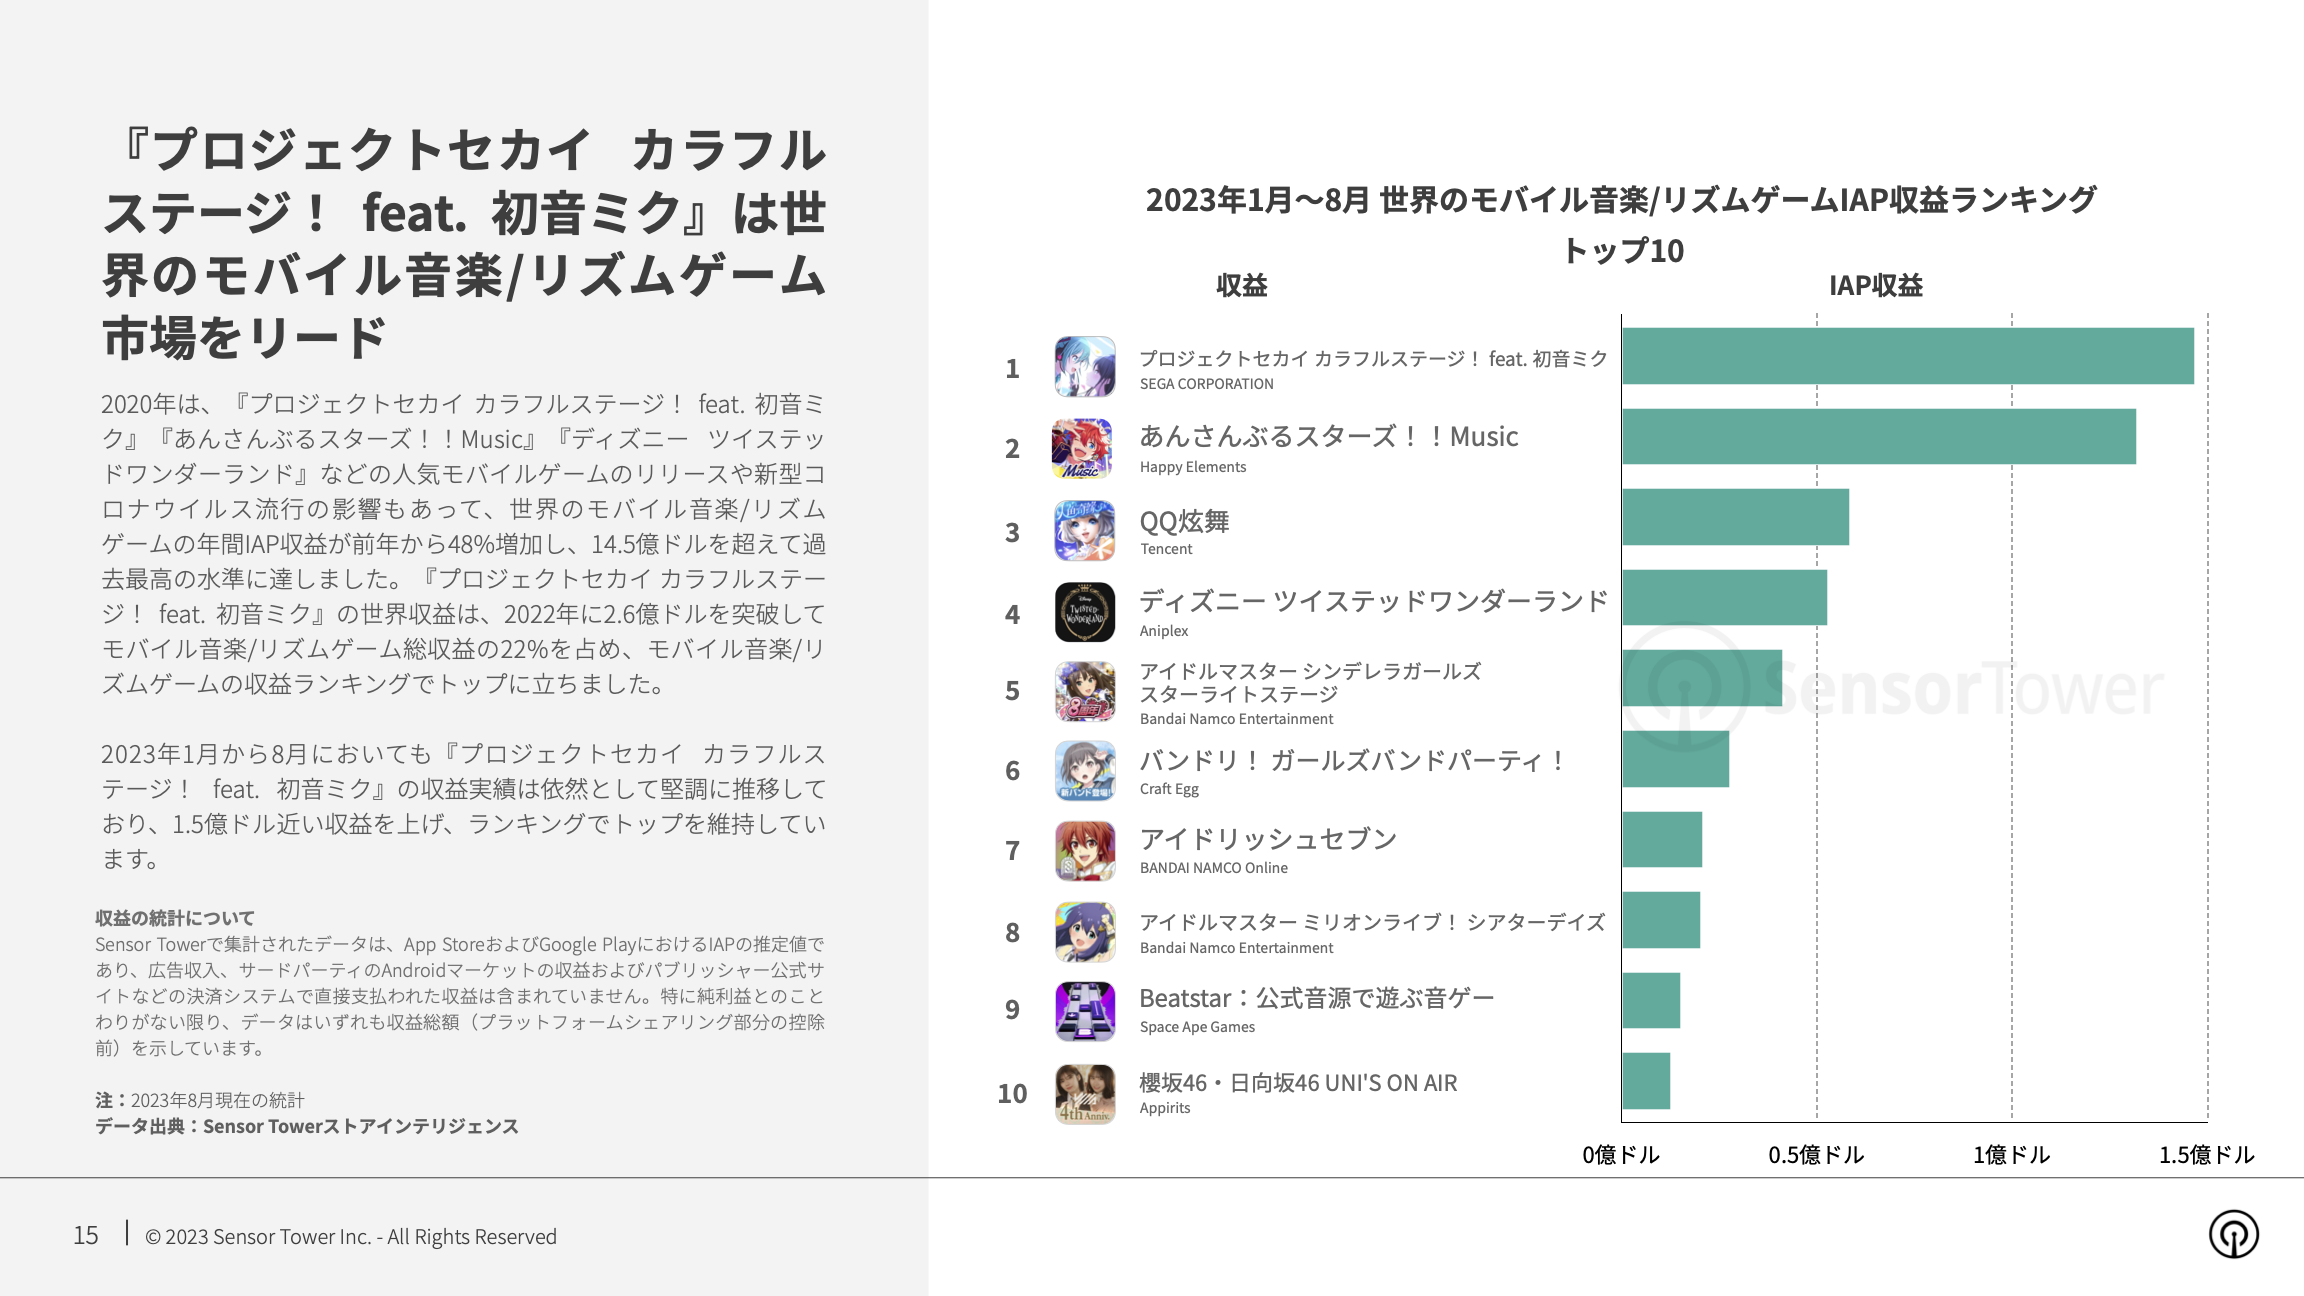 -JP- State of Mobile Games preferred by Women 2023 Report(pg15)